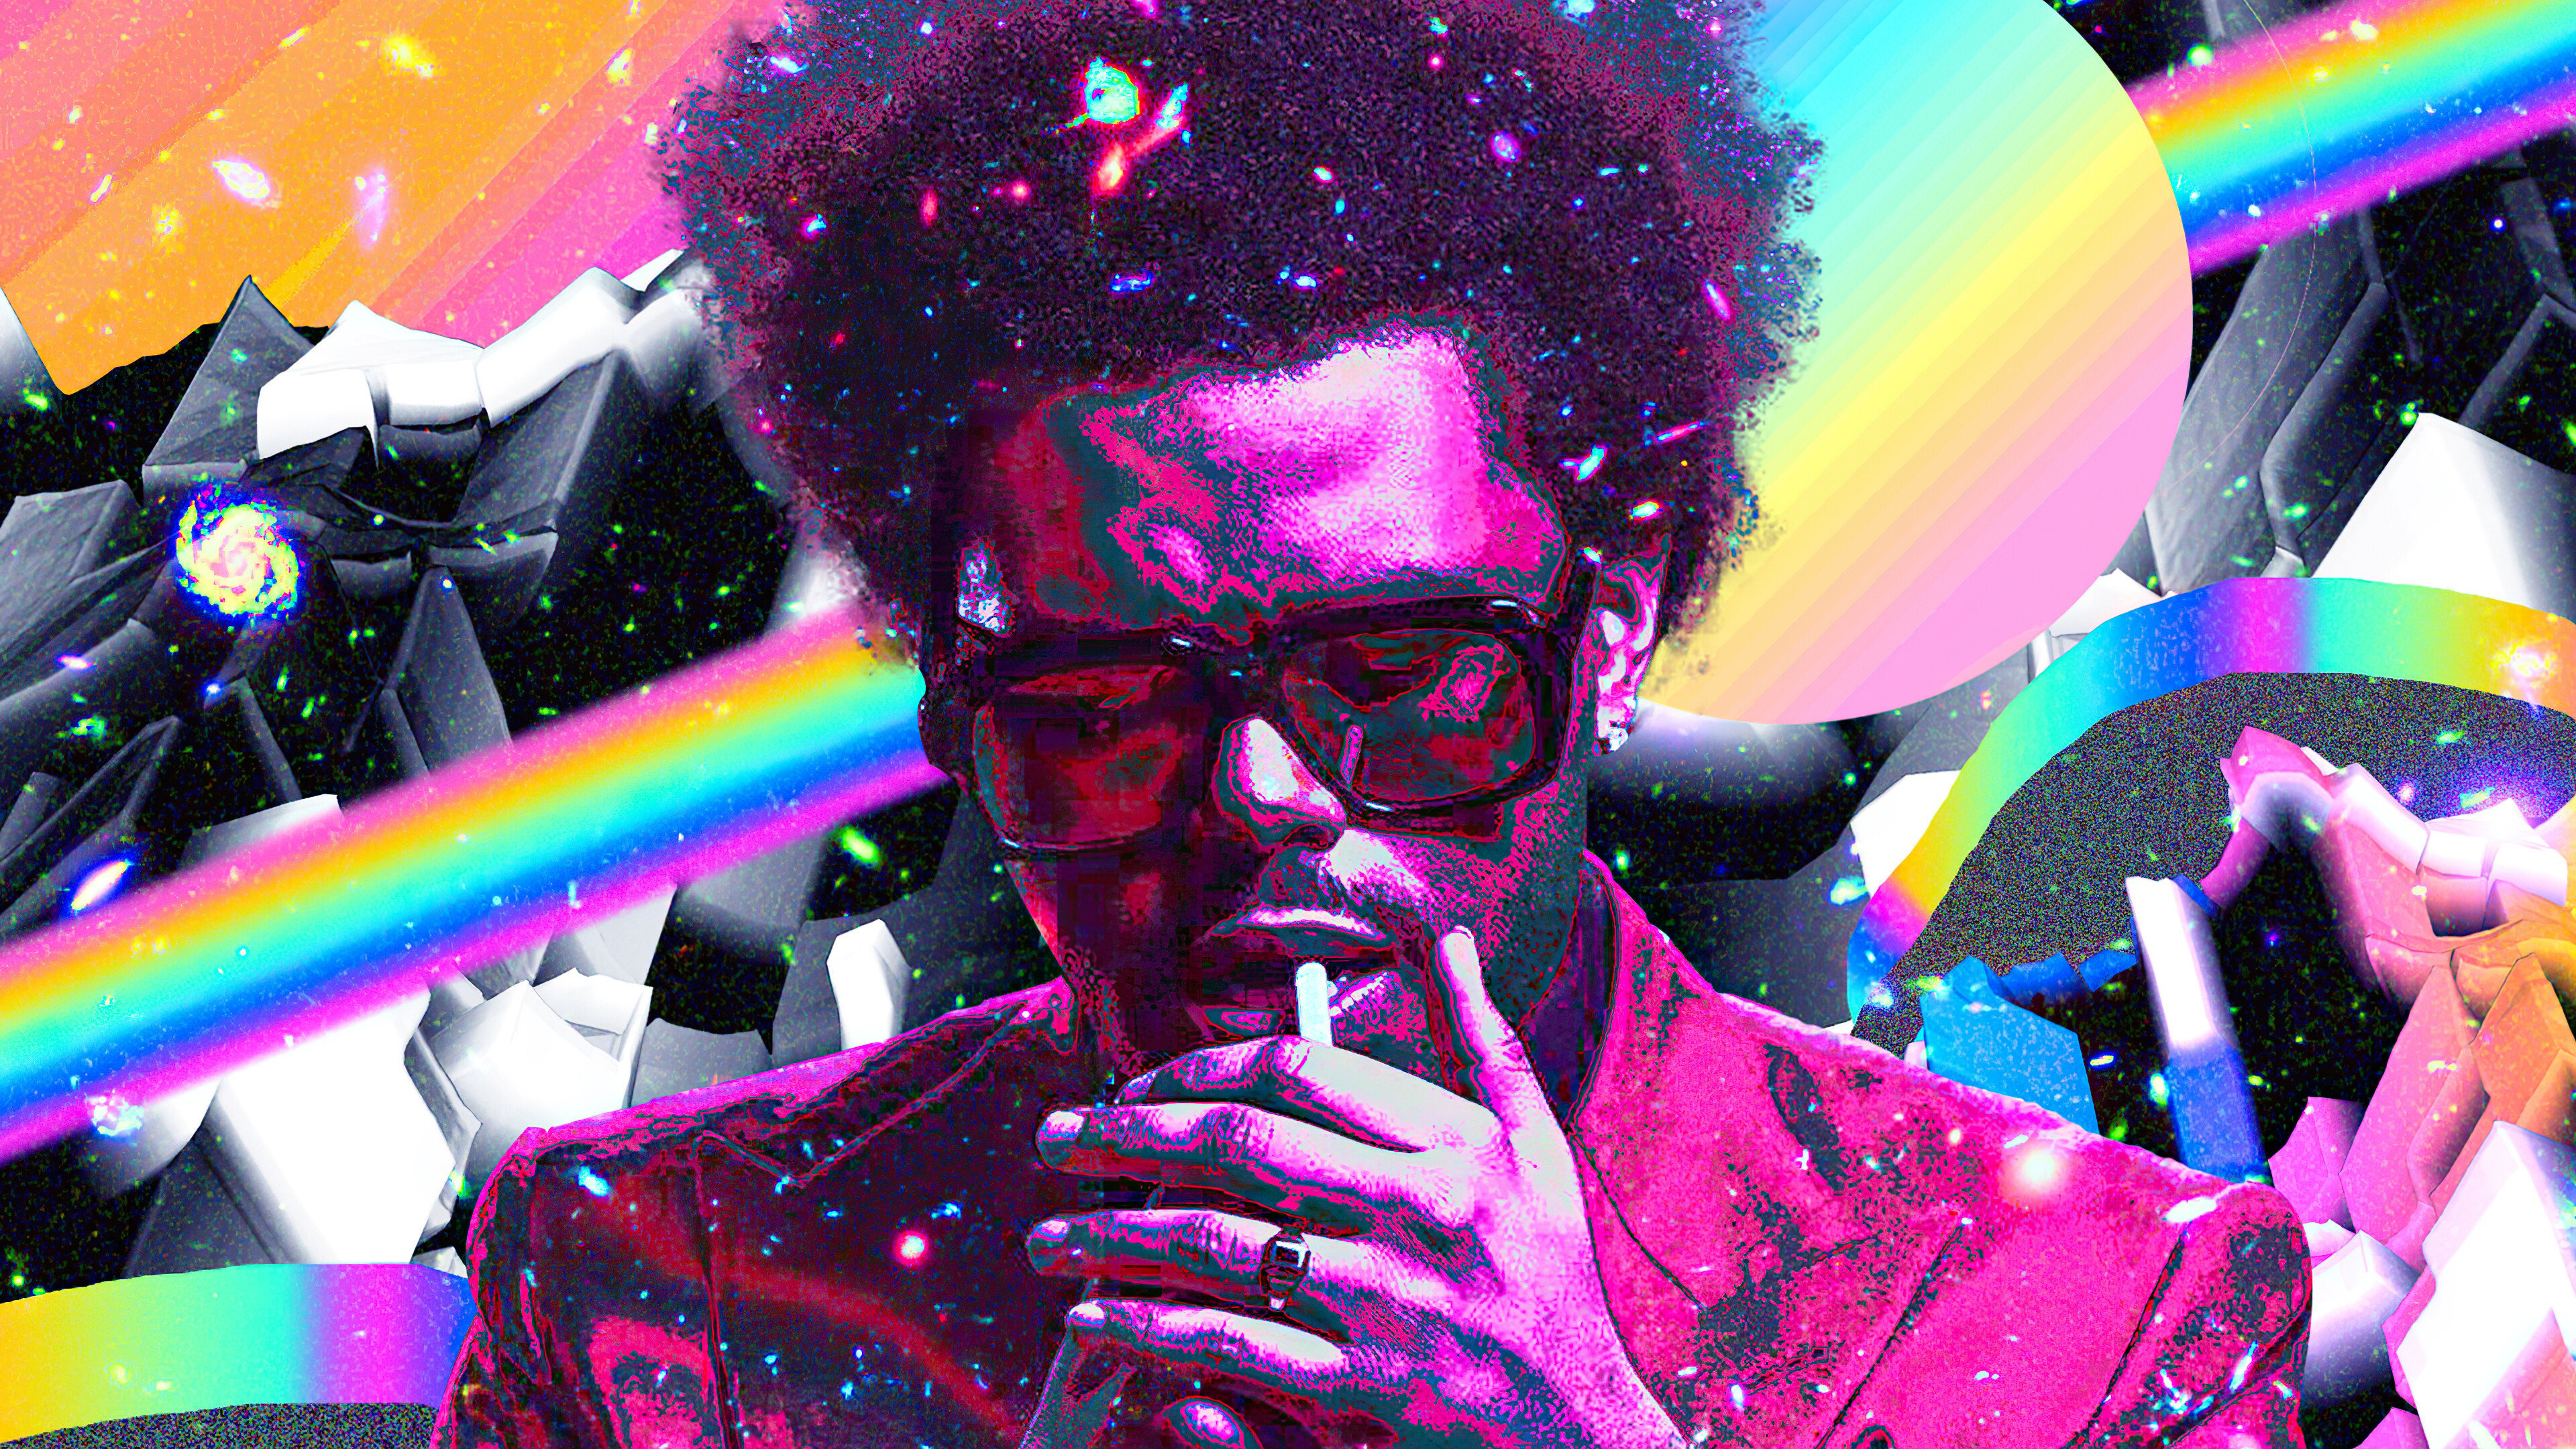 Wallpaper The Weeknd Colorful Art